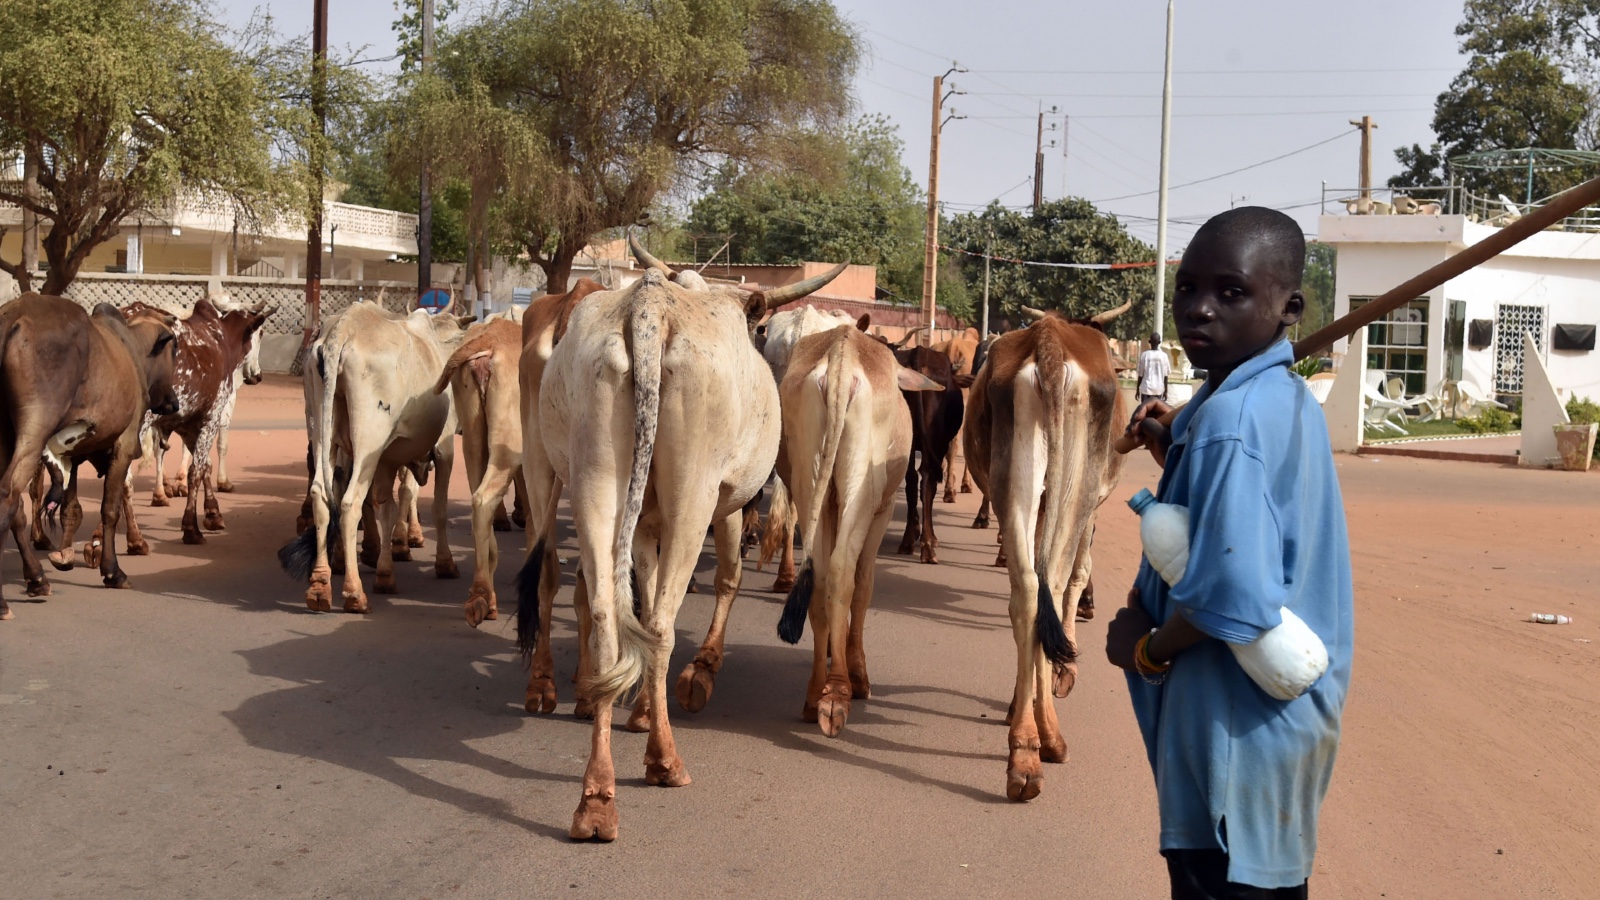 A person herds cattle through the streets of Niamey, Niger.